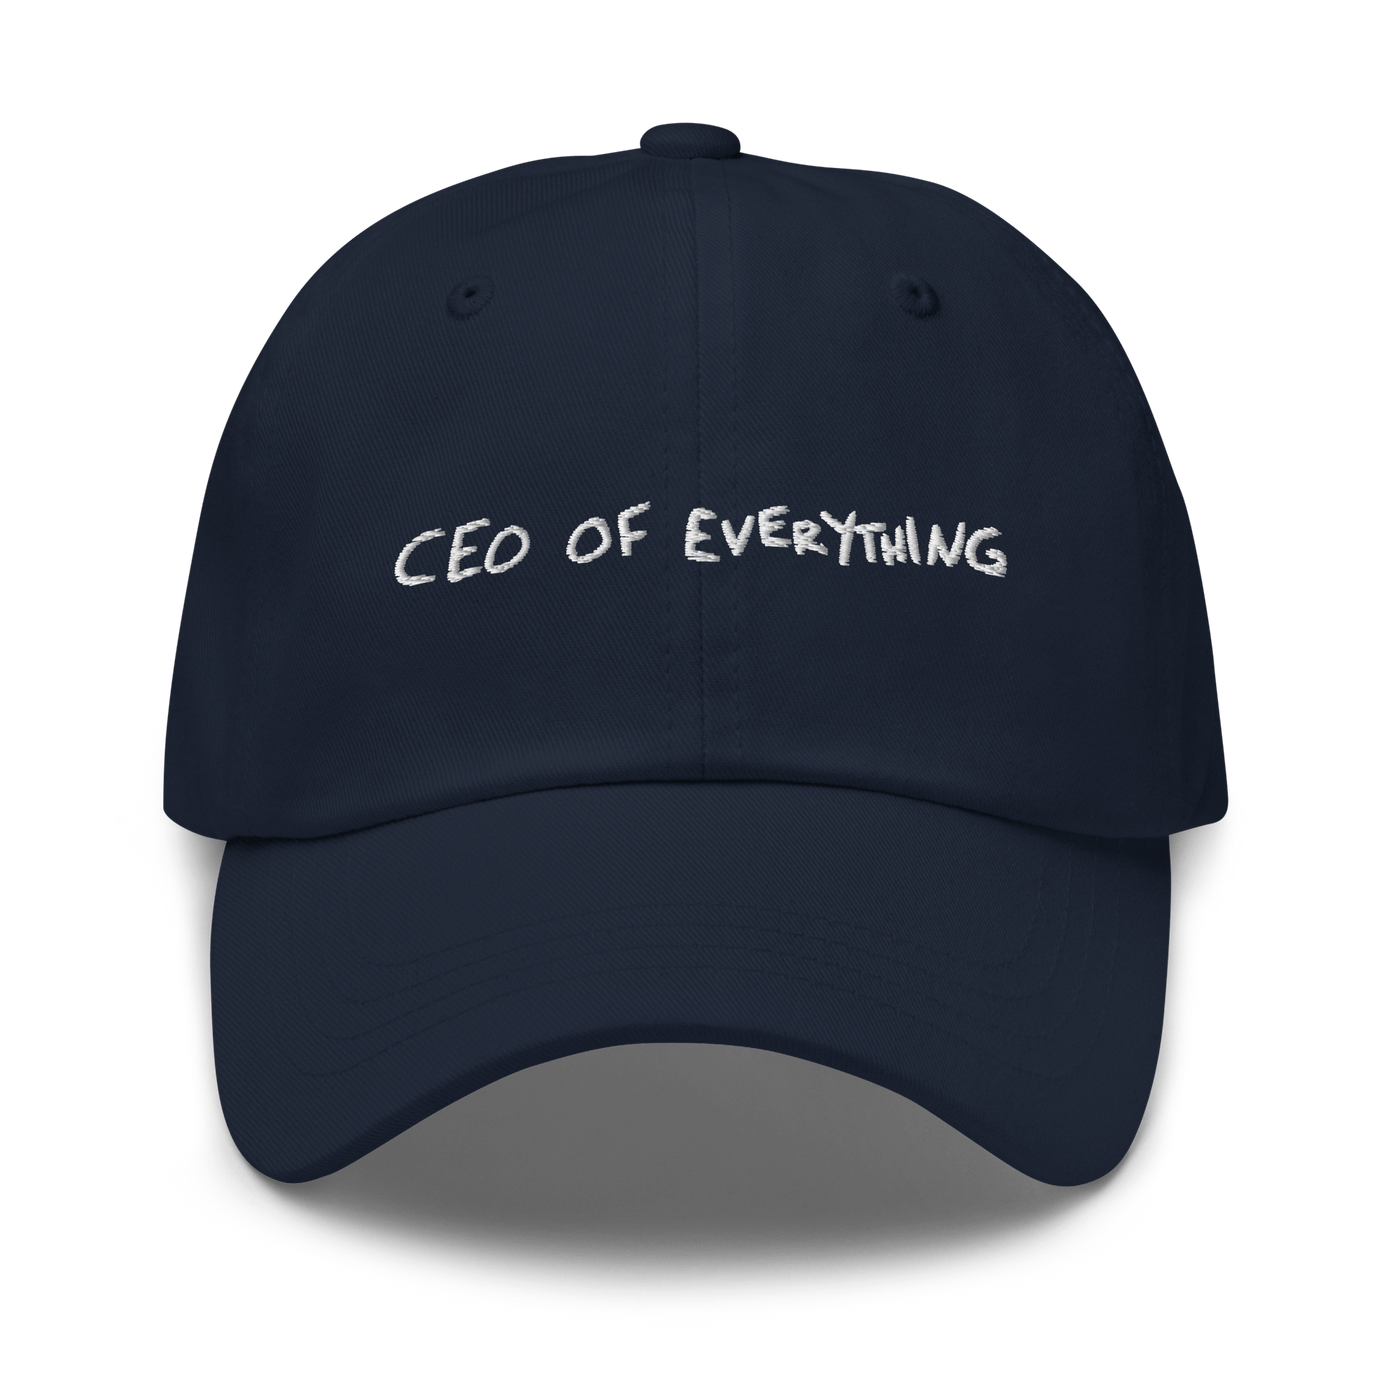 CEO of everything Dad hat - Black - - Just Another Cap Store